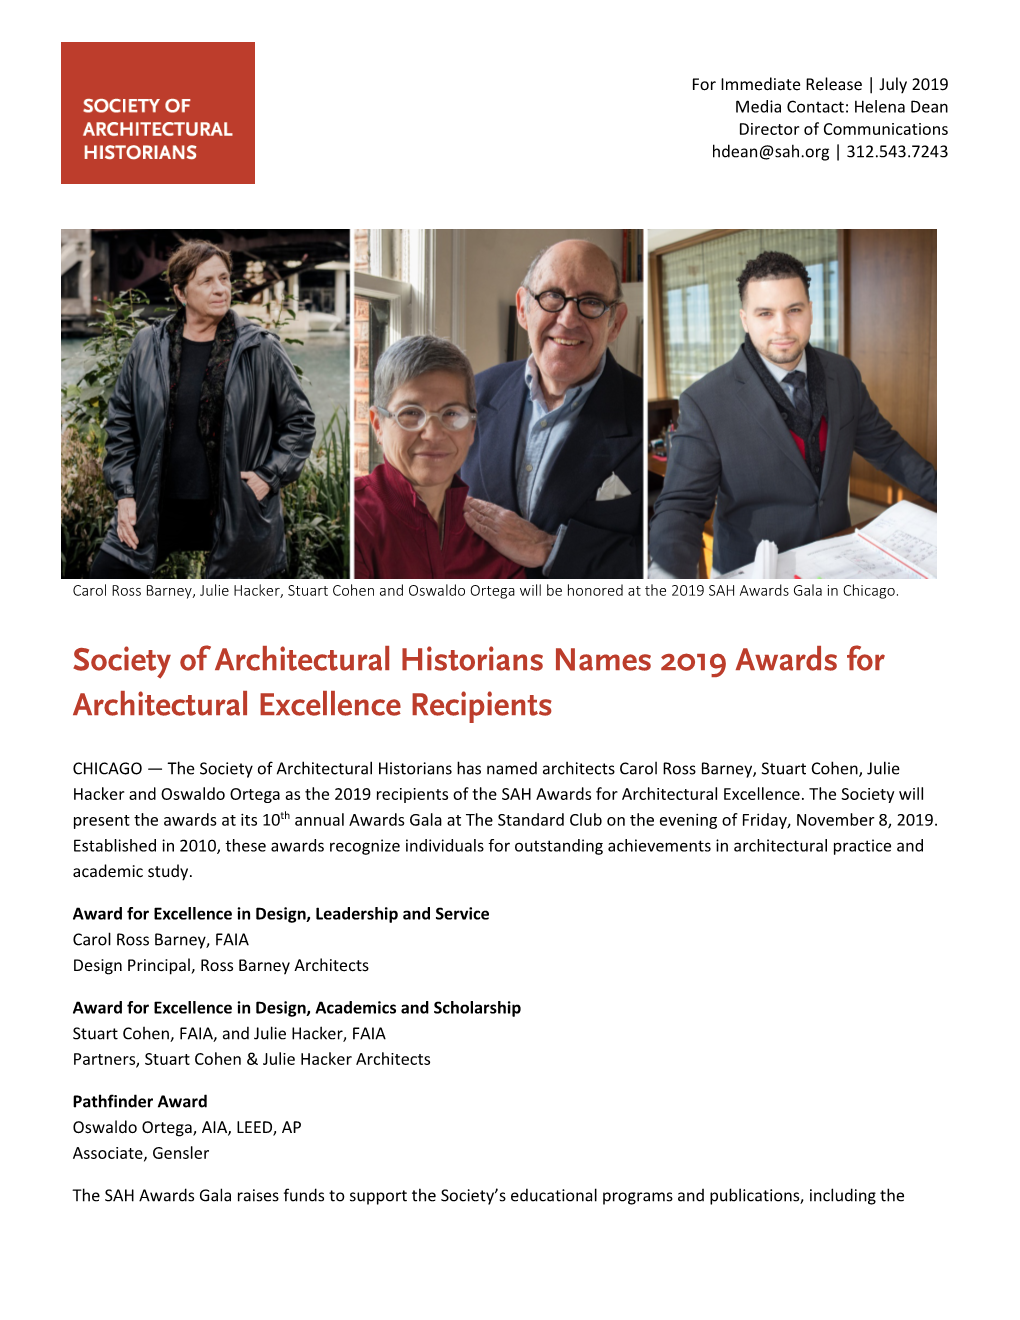 SAH Names Recipients of 2019 Awards for Architectural Excellence